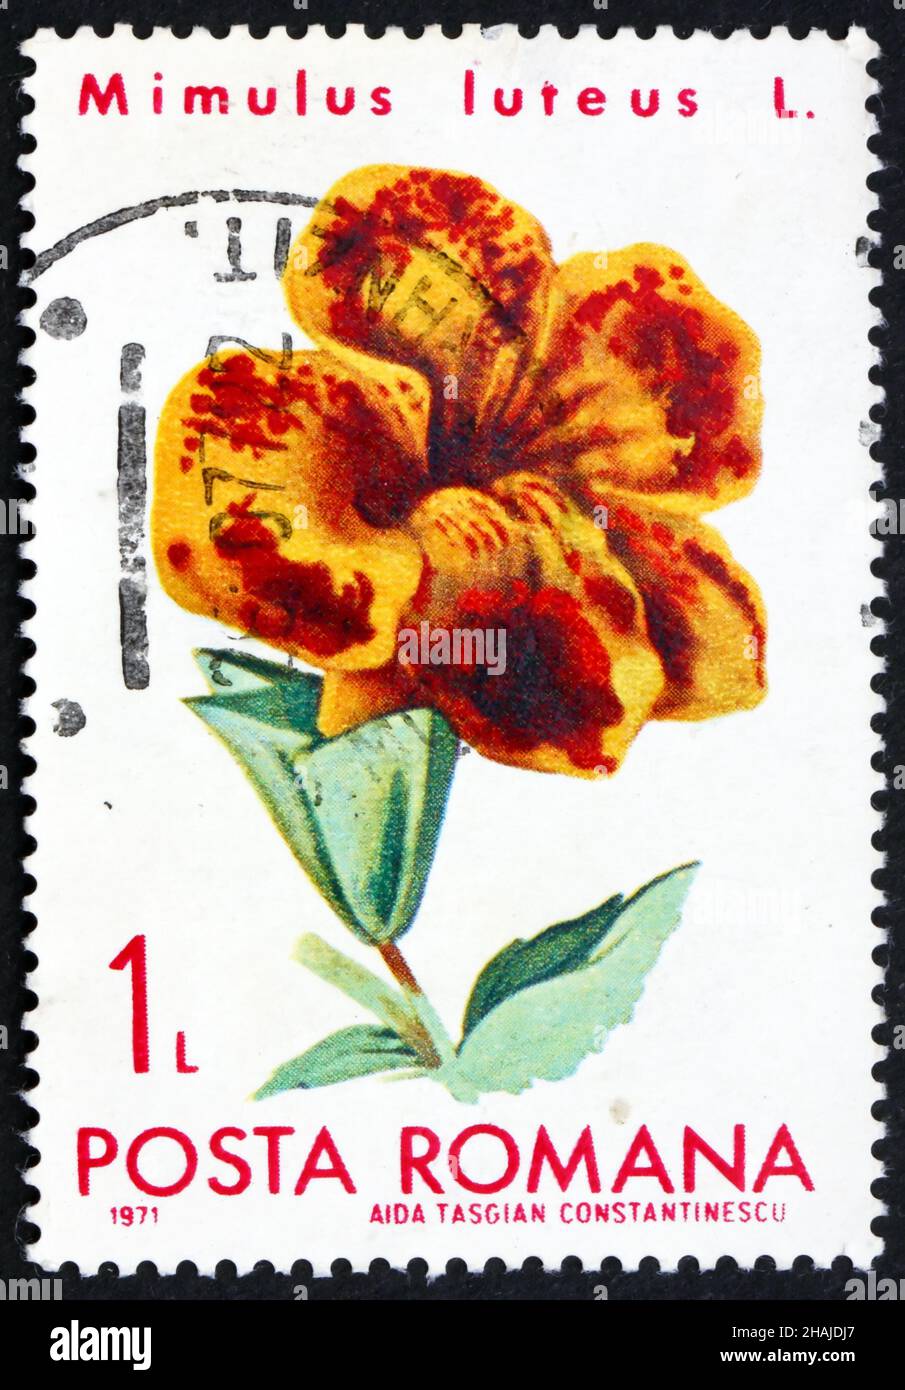 ROMANIA - CIRCA 1971: a stamp printed in the Romania shows Mimulus Luteus, Flower Stock Photo